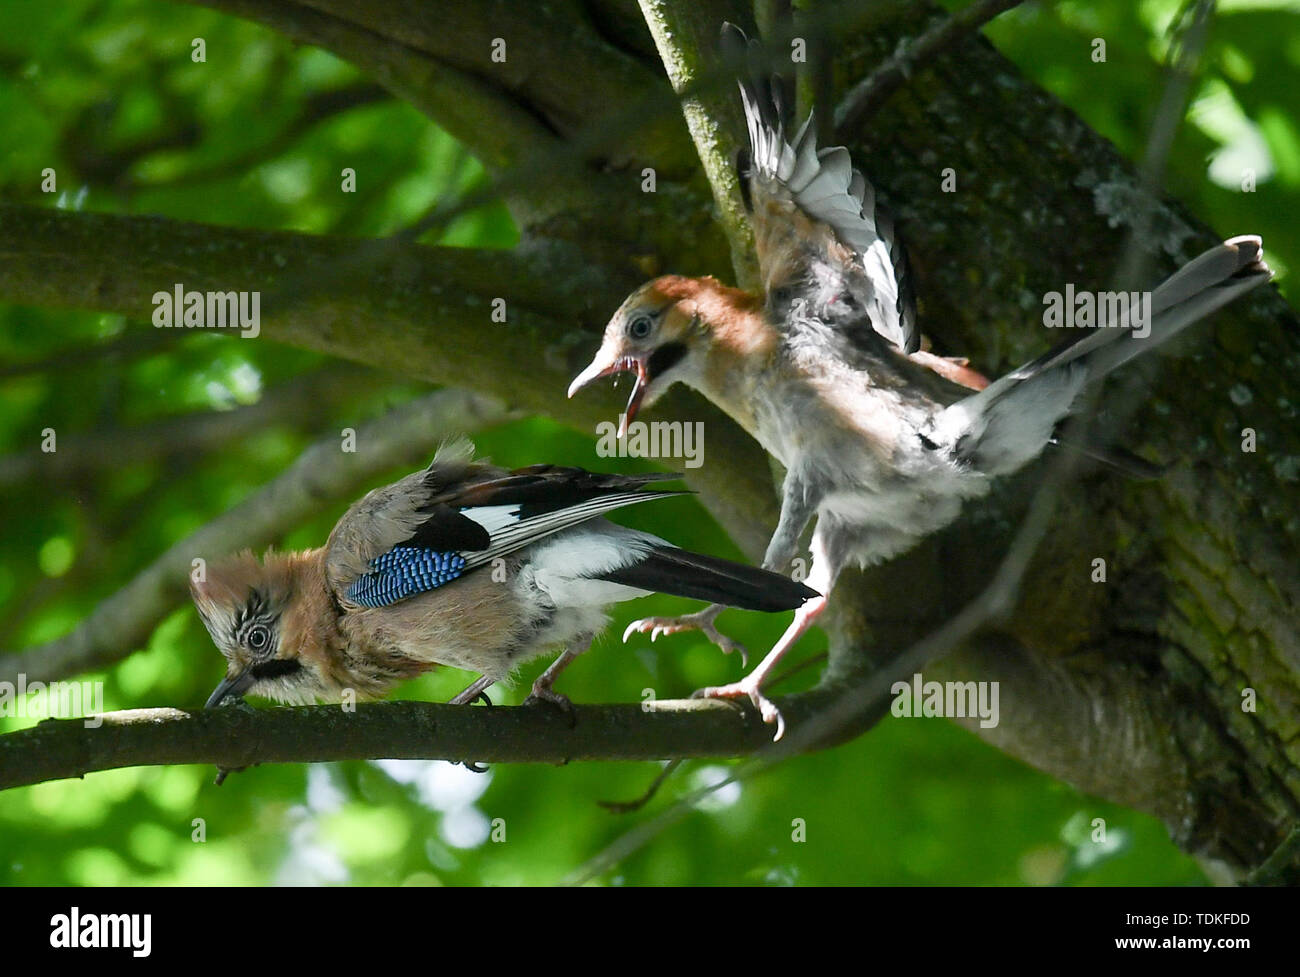 Berlin, Germany. 16th June, 2019. A jay cub flies to an adult jay to be fed. After leaving the nest, the boys are still fed for 3 to 4 weeks. Credit: Jens Kalaene/dpa-Zentralbild/dpa/Alamy Live News Stock Photo